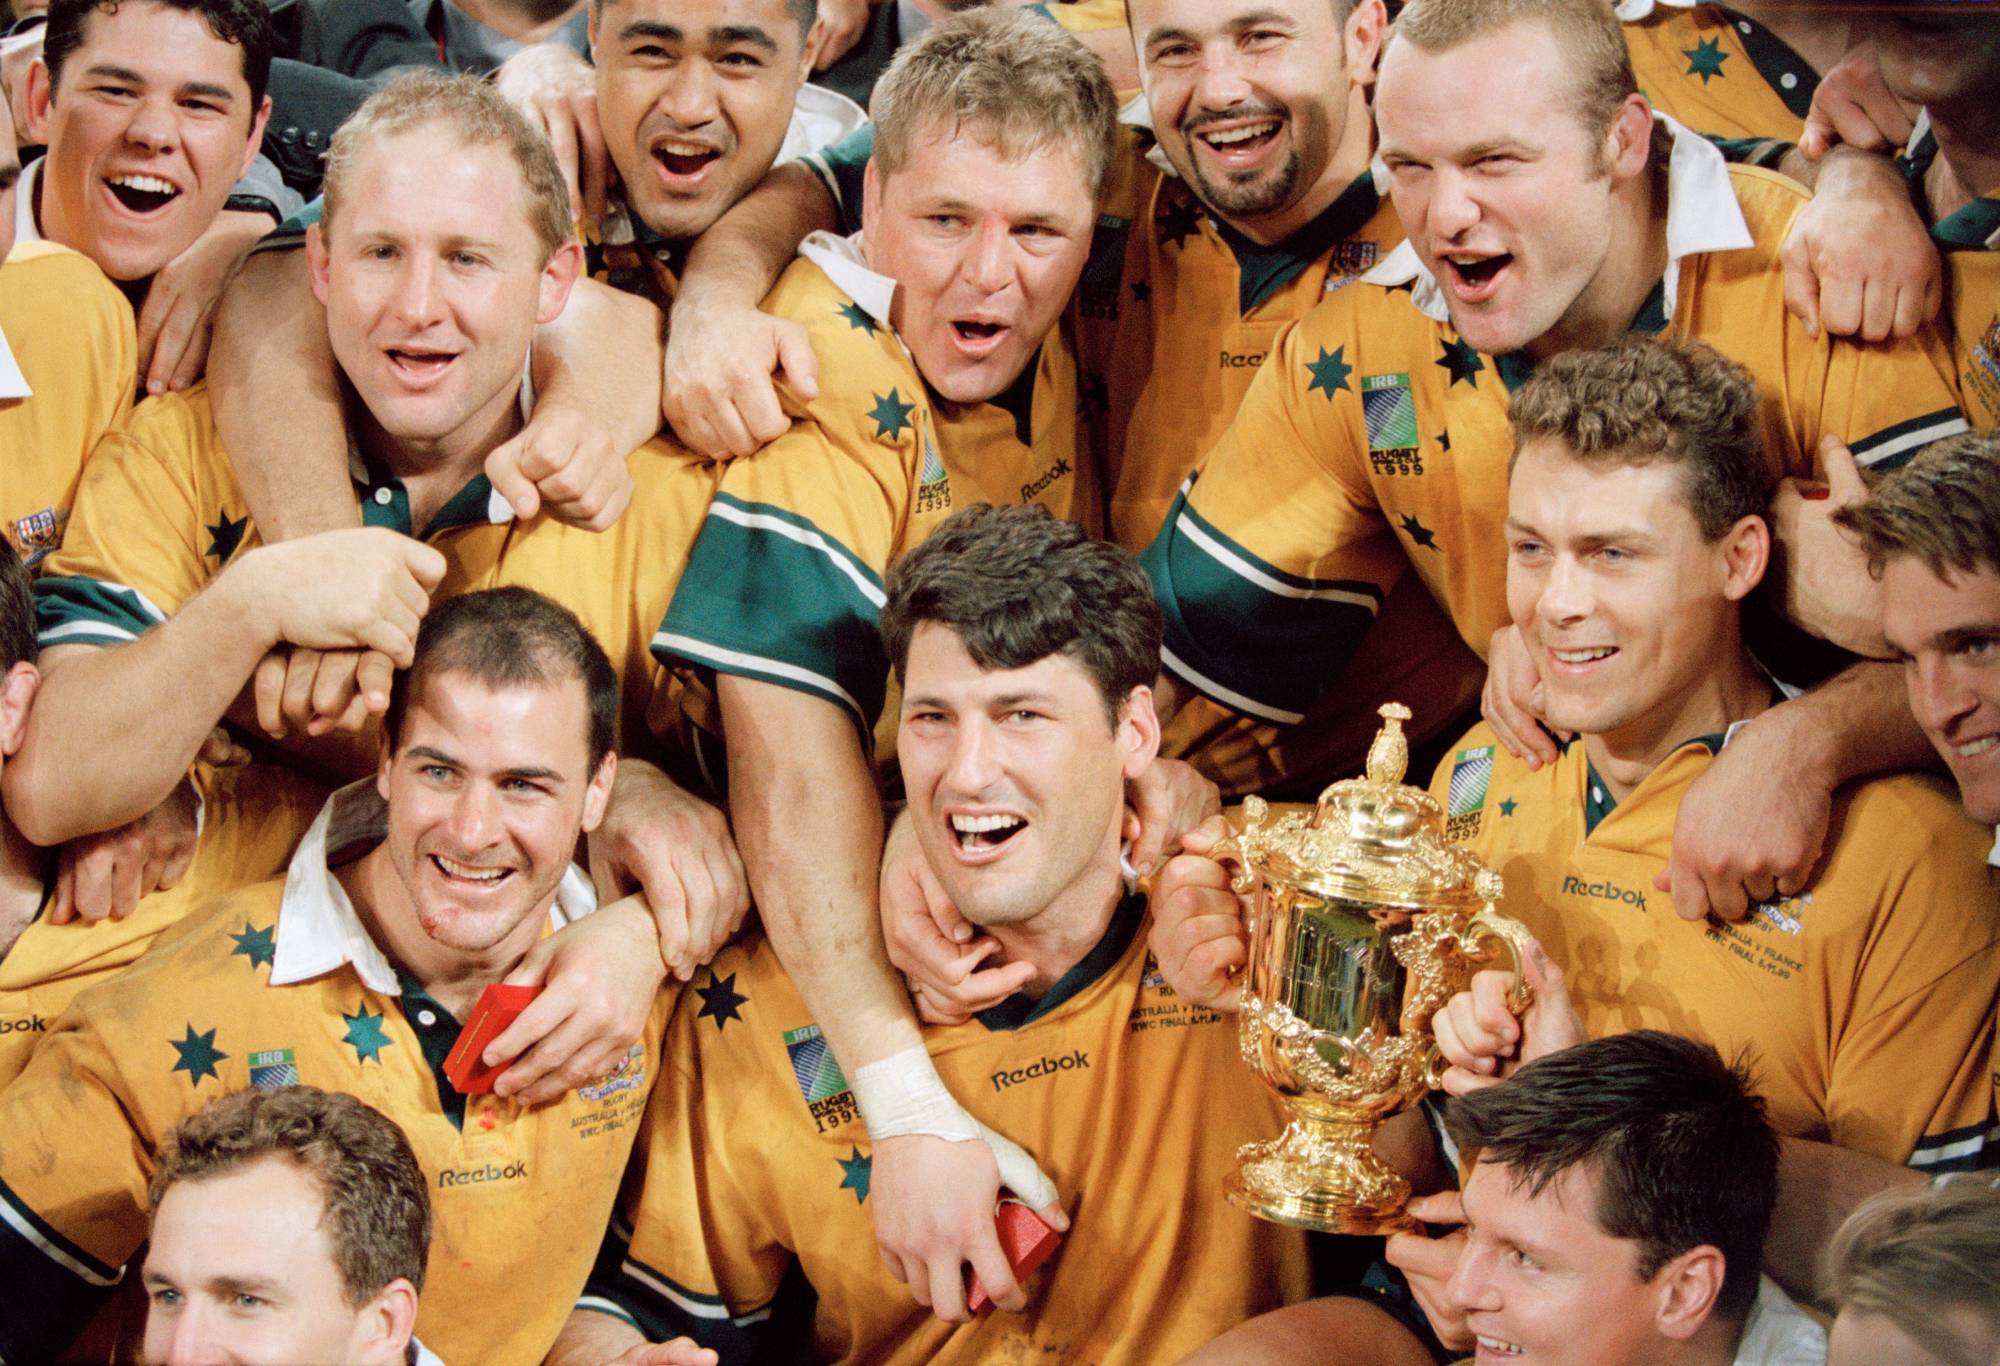 Australian captain John Eales (C) and his teammates celebrate after winning the 1999 Rugby Union World Cup final against France. Australia won the final 35 to 12. (Photo by Franck Seguin/Corbis/VCG via Getty Images)